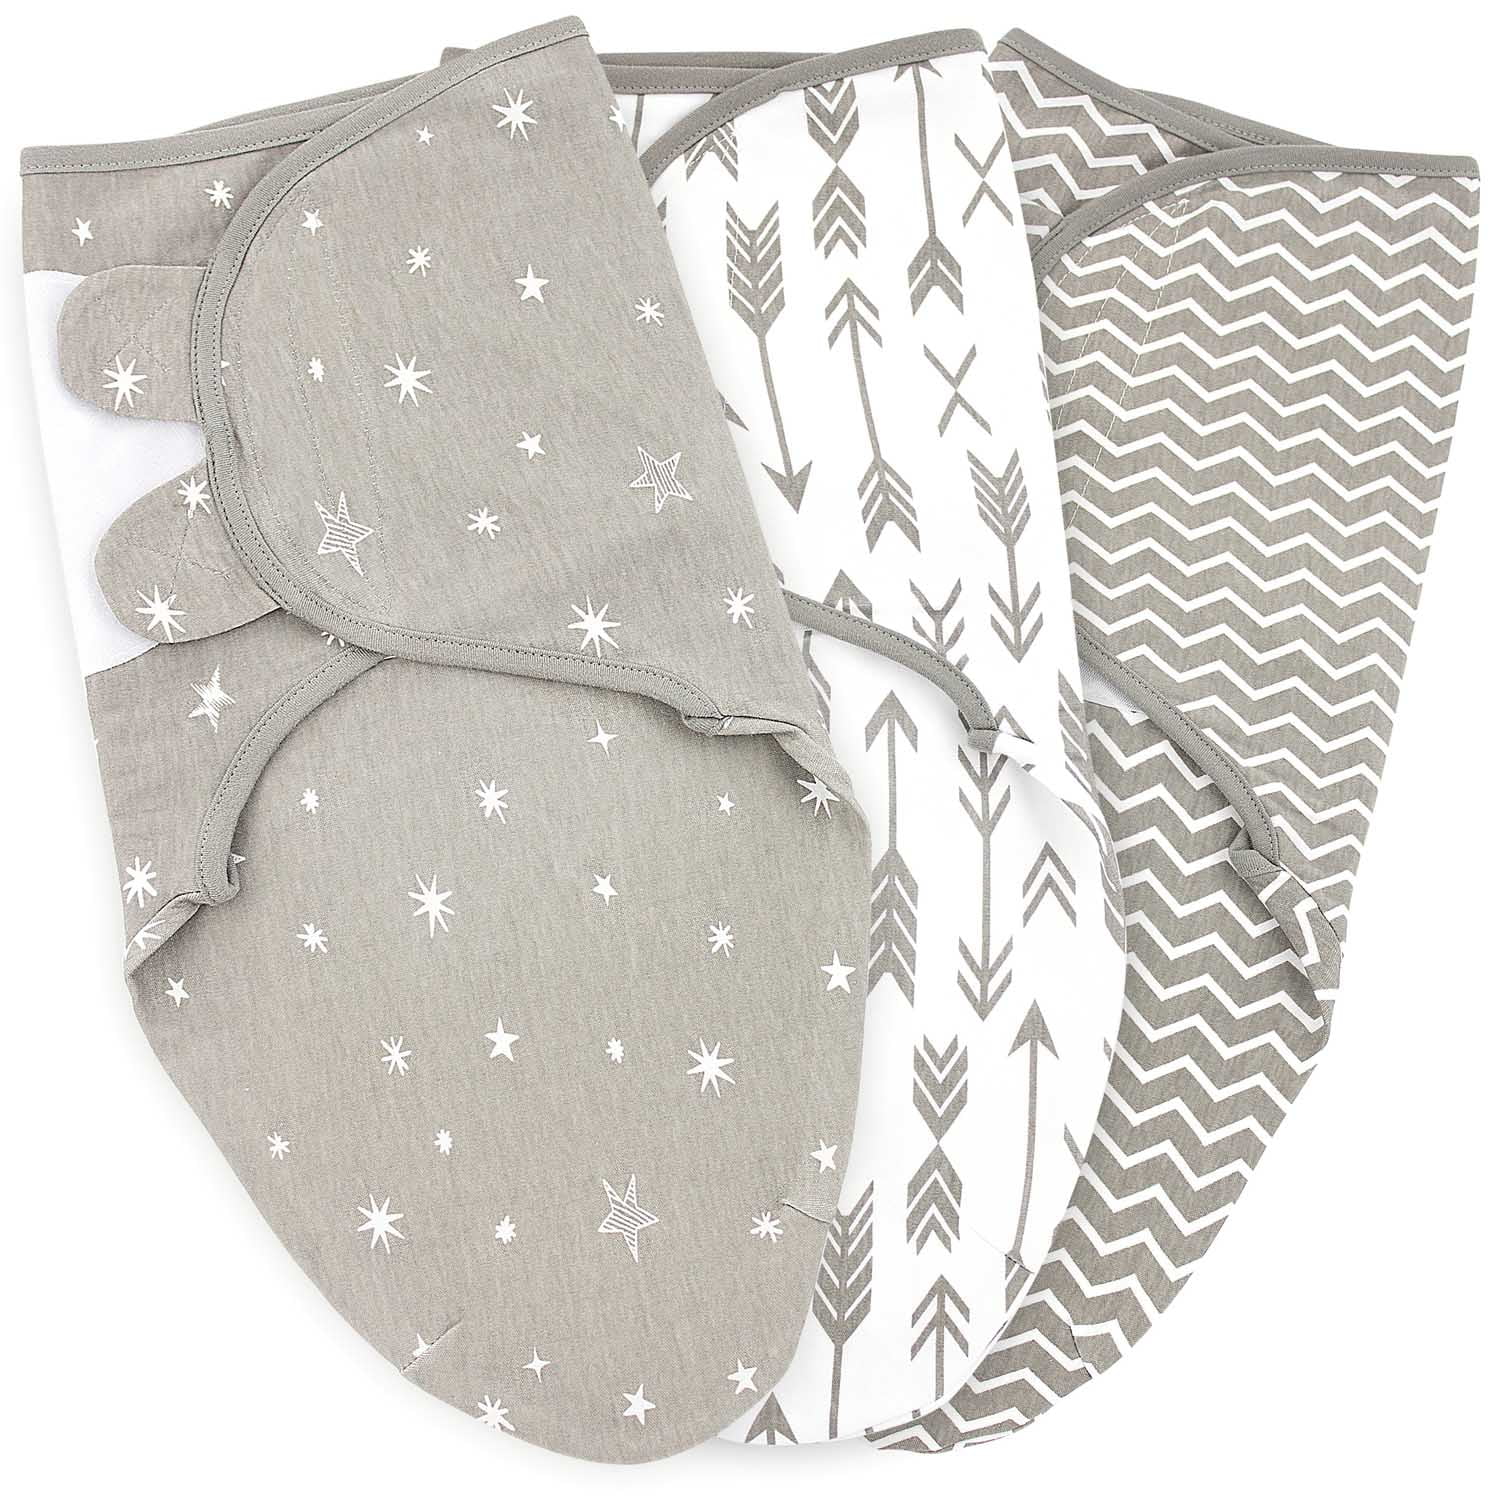 Swaddle Blanket Adjustable Newborn Swaddle Set for Baby Girls and Boys 3-Pack Soft Organic Cotton 0-3 Month Baby Swaddle Wrap for Infant 